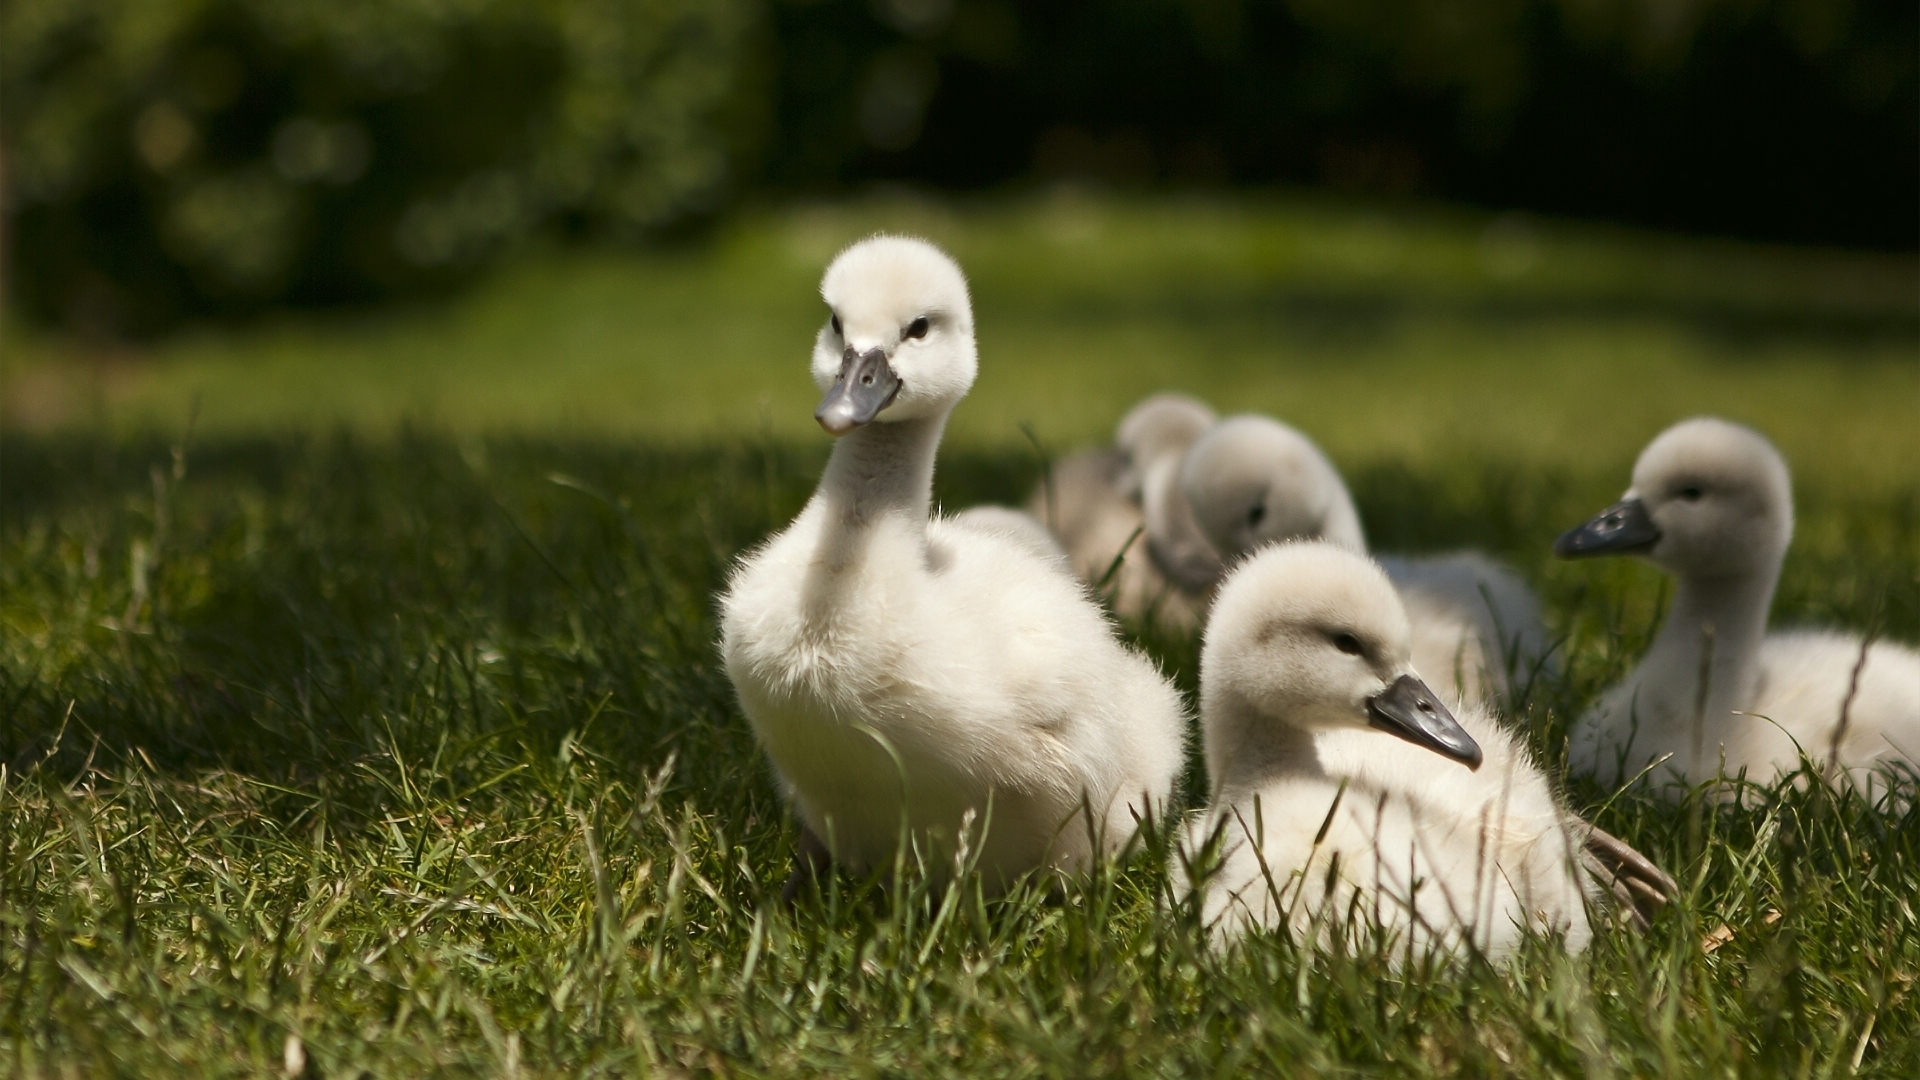 Sweet Baby Swans for 1920 x 1080 HDTV 1080p resolution